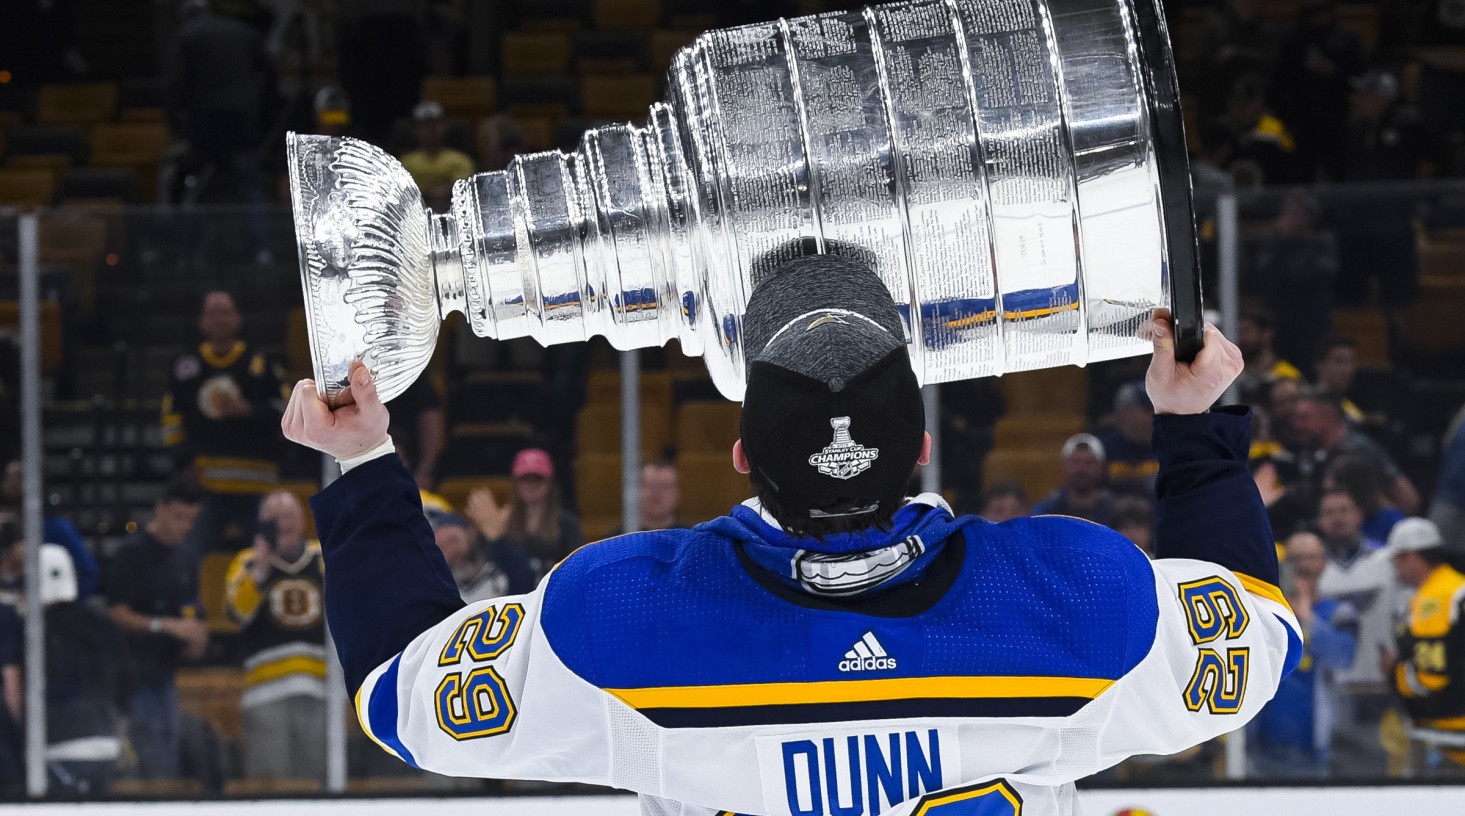 Vince Dunn of the St. Louis Blues hoists the Stanley Cup